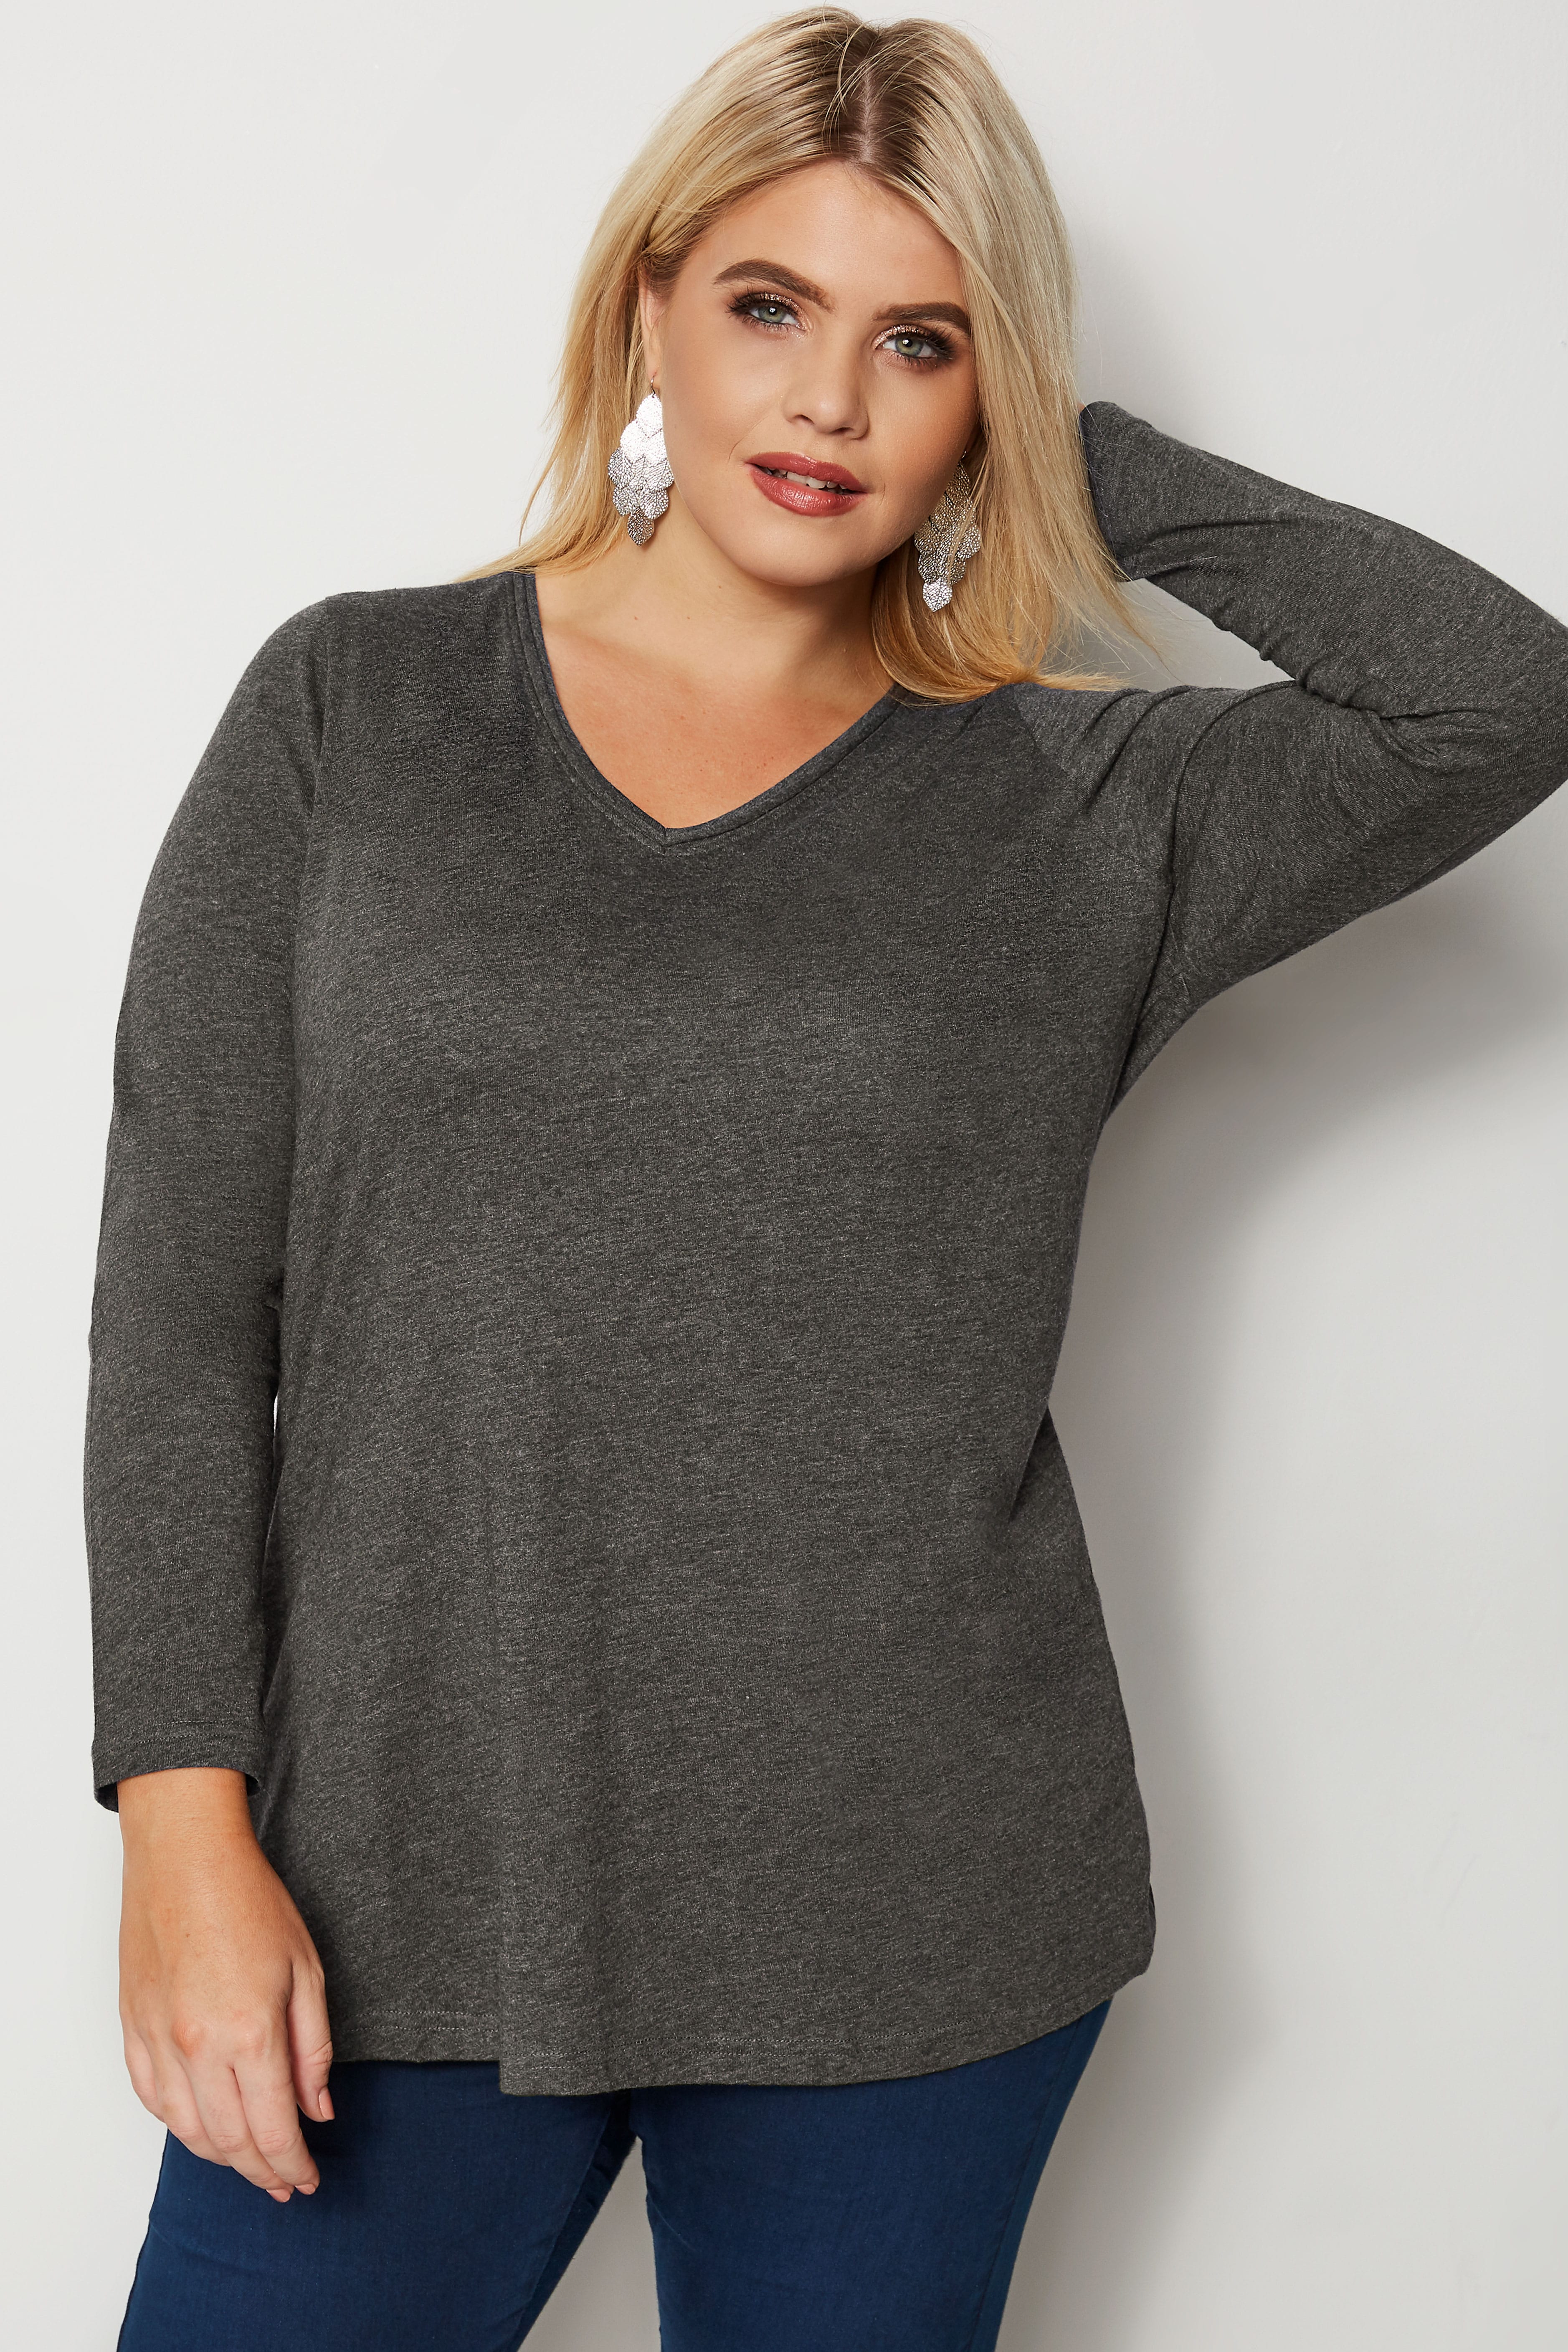 Charcoal Grey Long Sleeved V-Neck Jersey Top, Plus size 16 to 36 ...